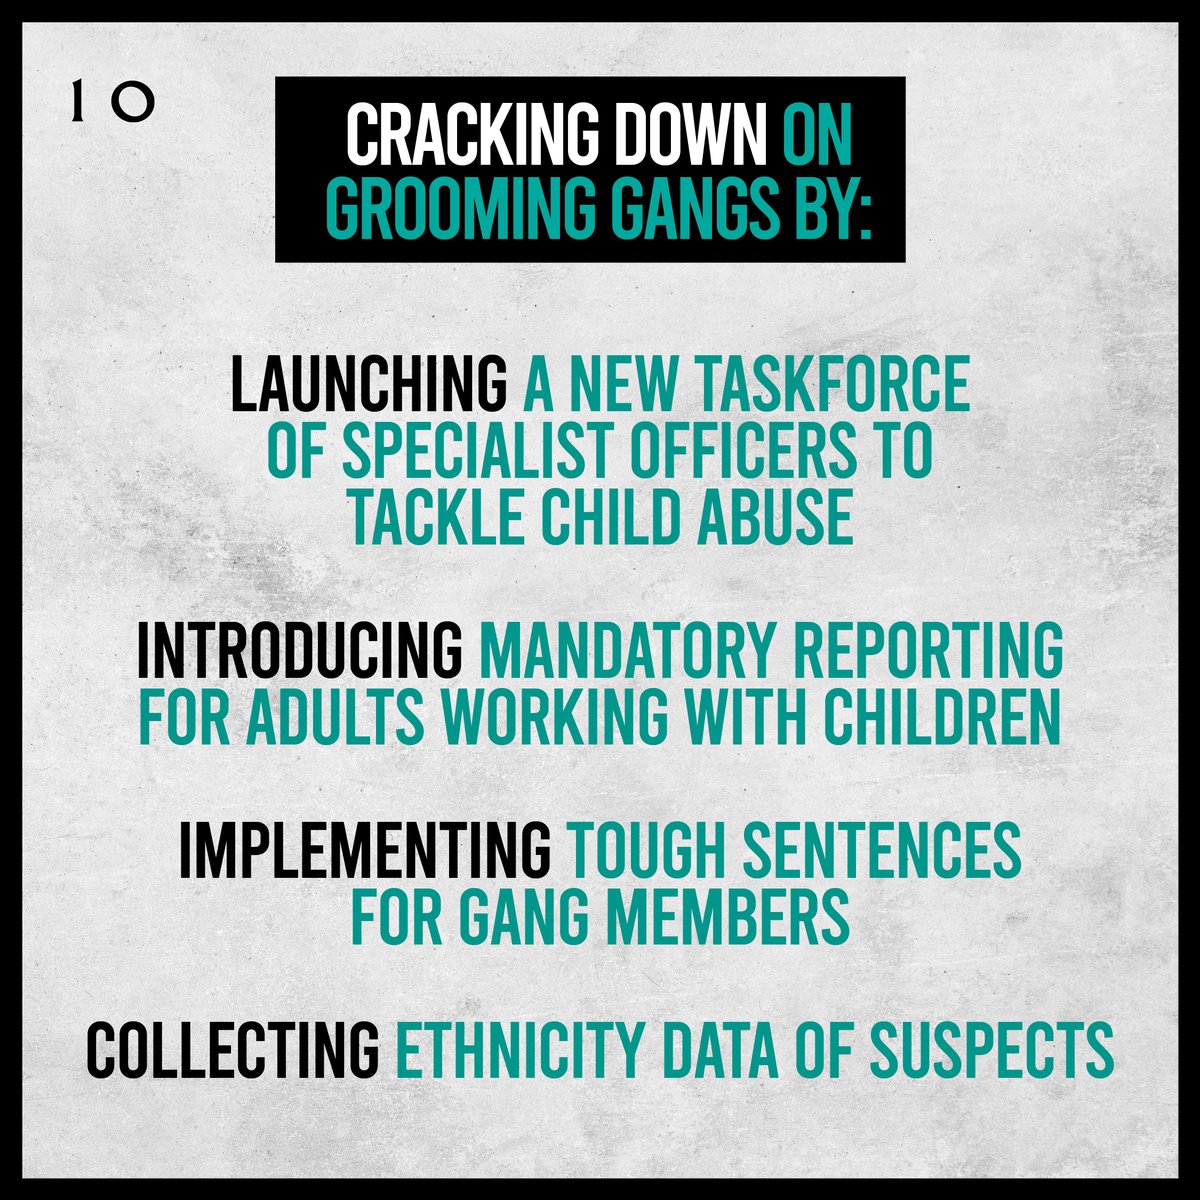 Political correctness should never get in the way of keeping women and young girls safe. That's why I’m leading the most robust action Government has ever taken to crack down on grooming gangs. We will do whatever it takes to root out this evil once and for all.